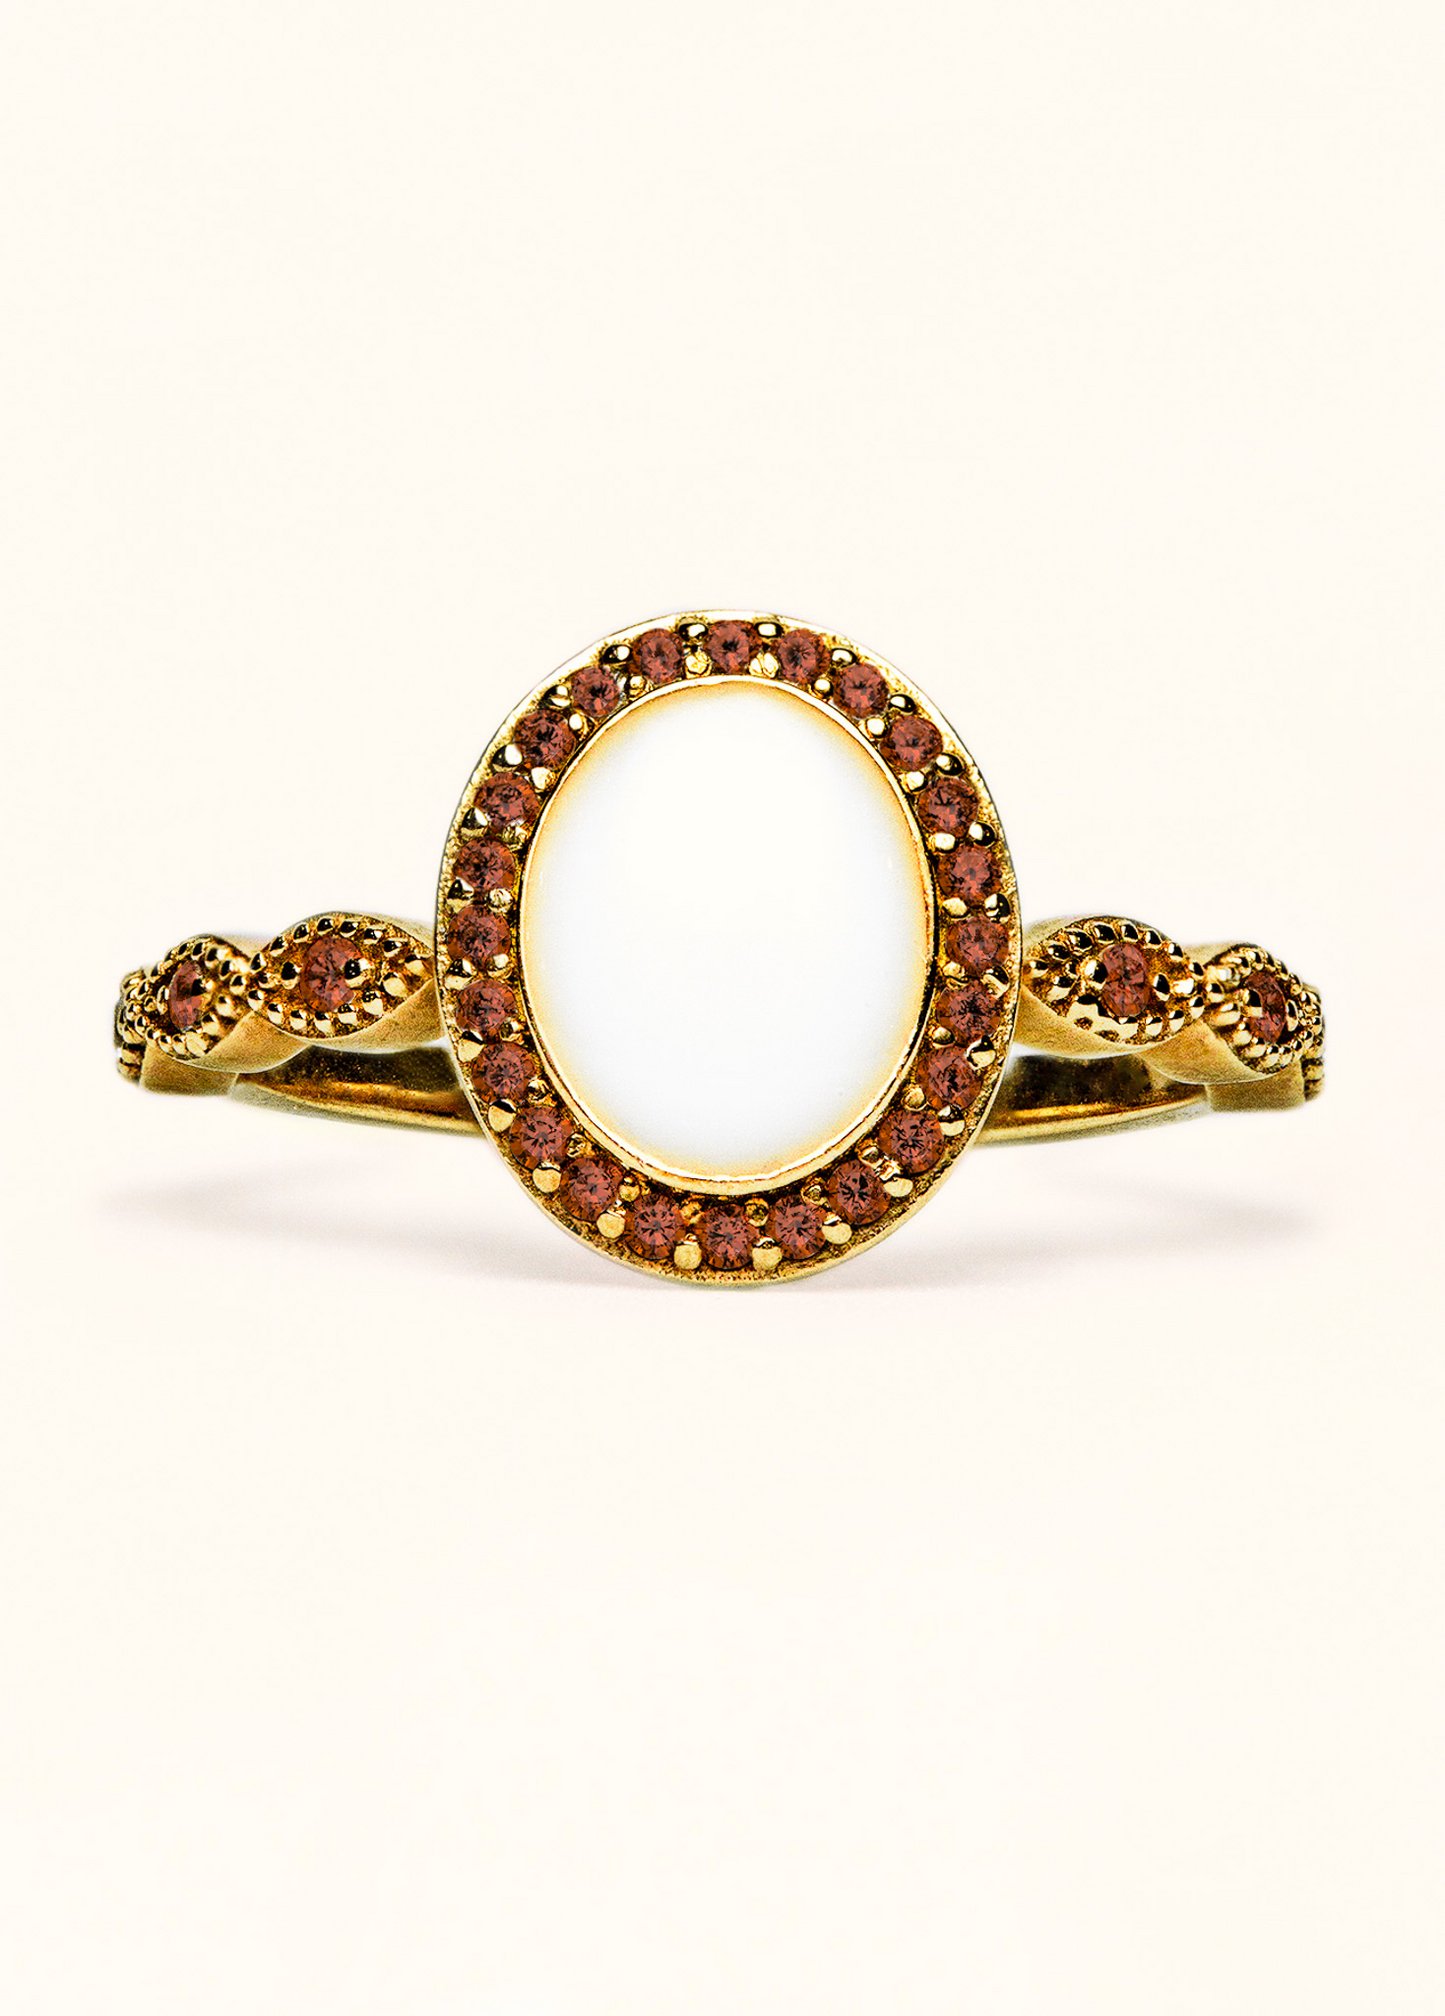 Serenity Ring with Ornate Band